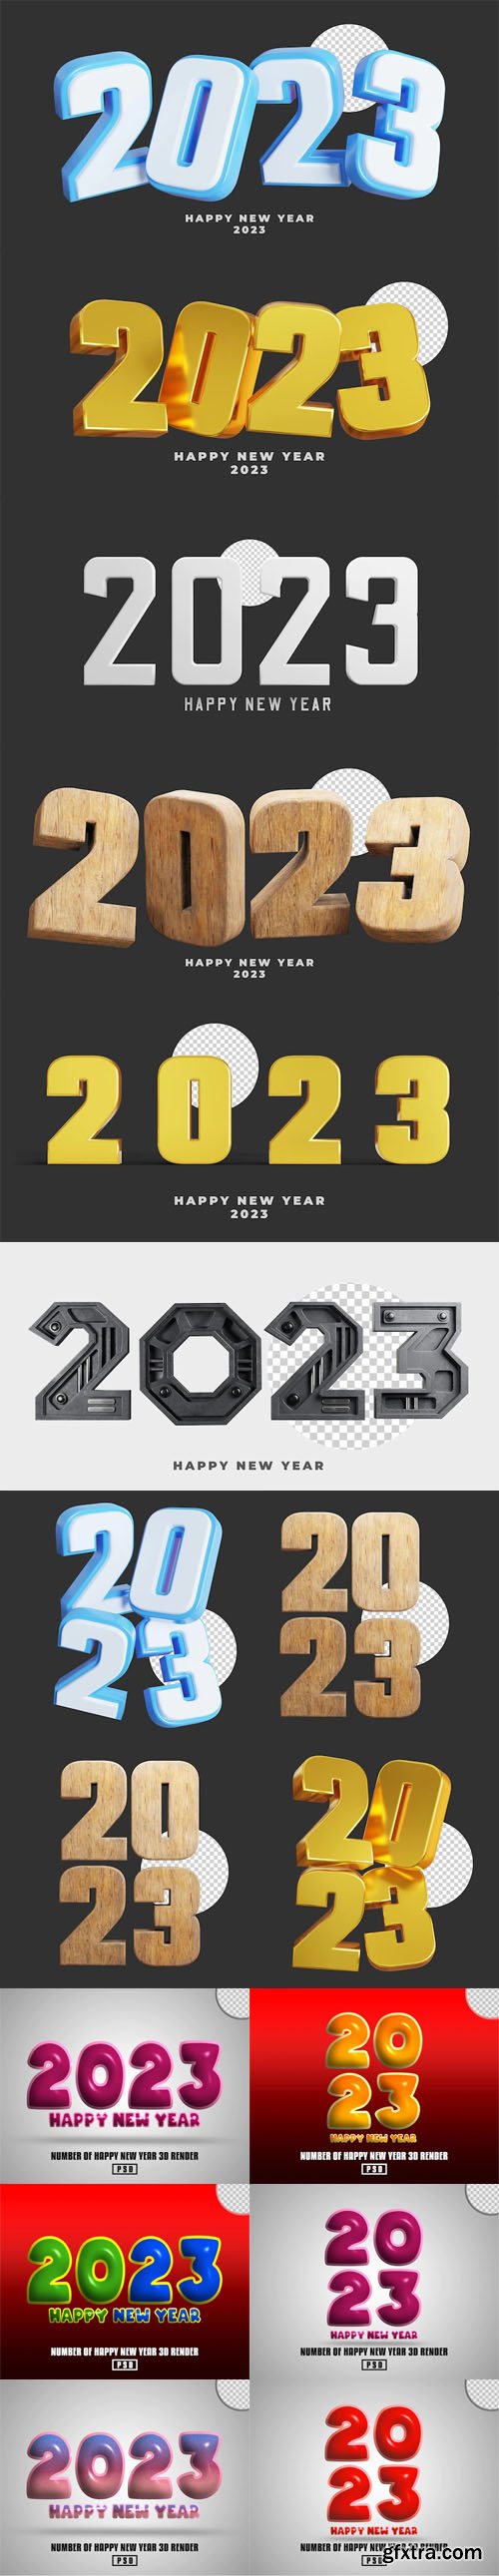 15 Happy New Year 2023 3D Renders PSD Templates